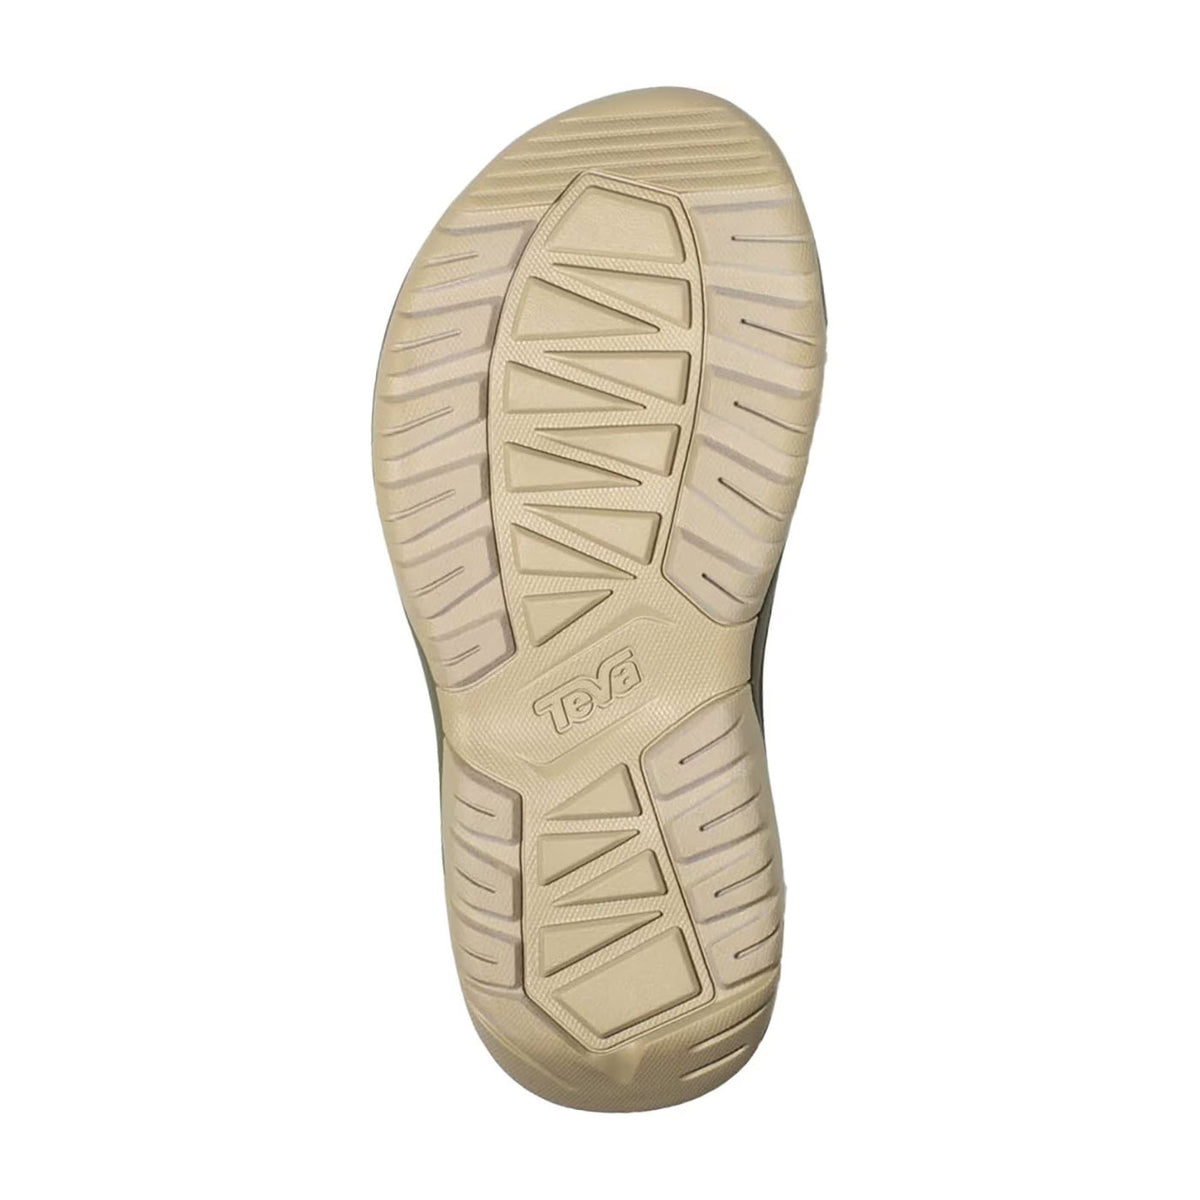 Bottom view of a single Teva Hurricane XLT2 Burnt Olive - Womens sport sandal sole with grippy traction and branding.